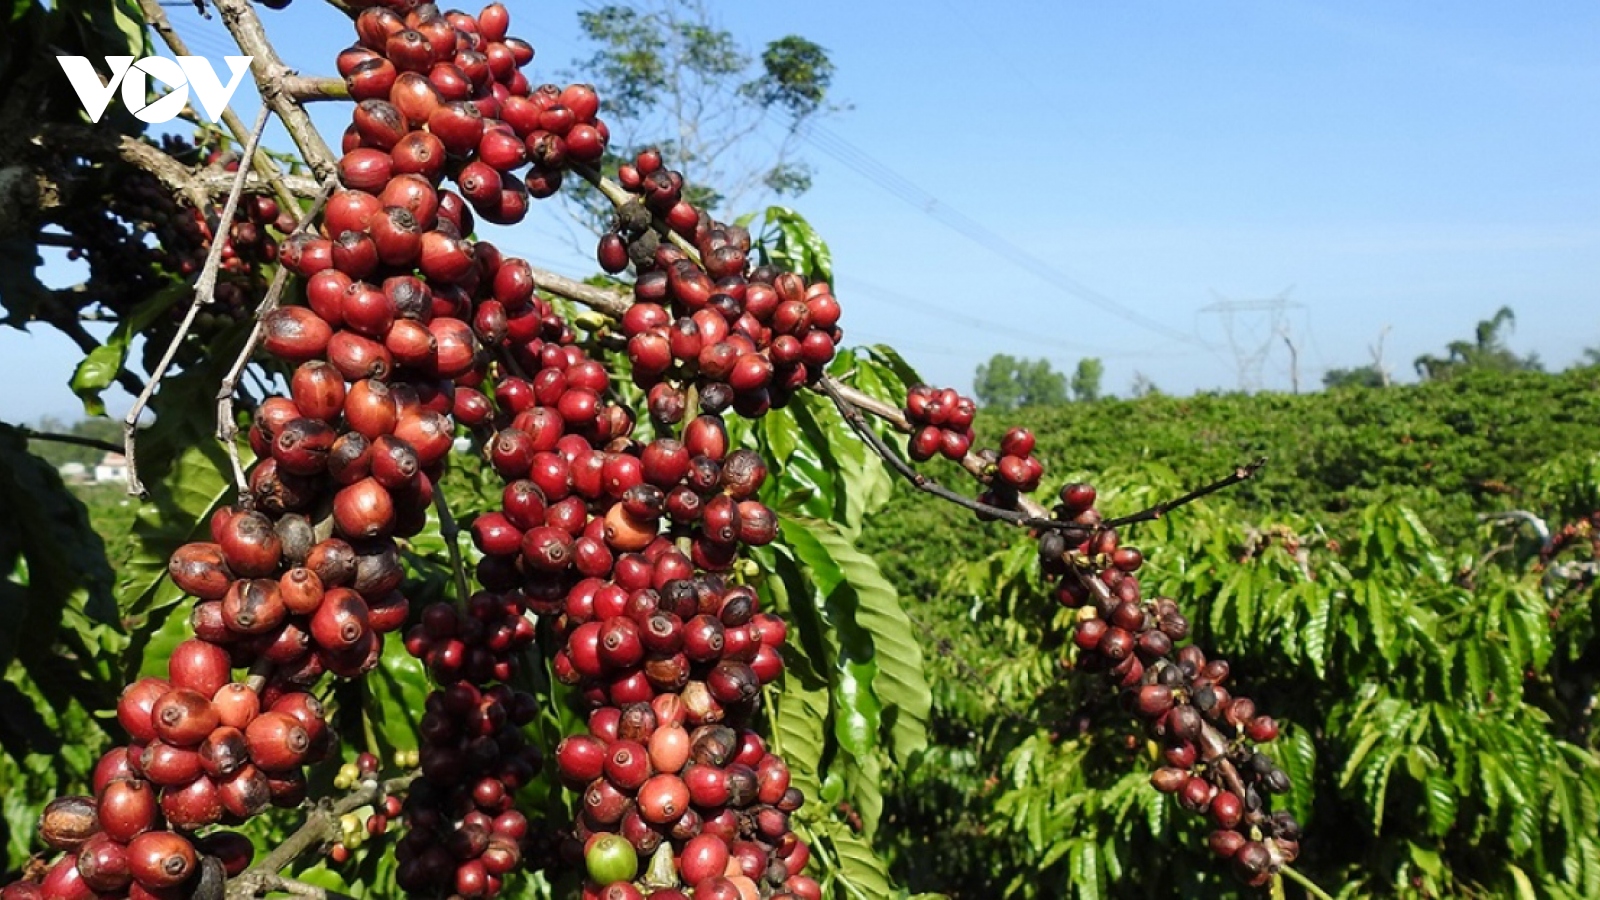 Vietnam ranks second among top five suppliers of coffee to Italy